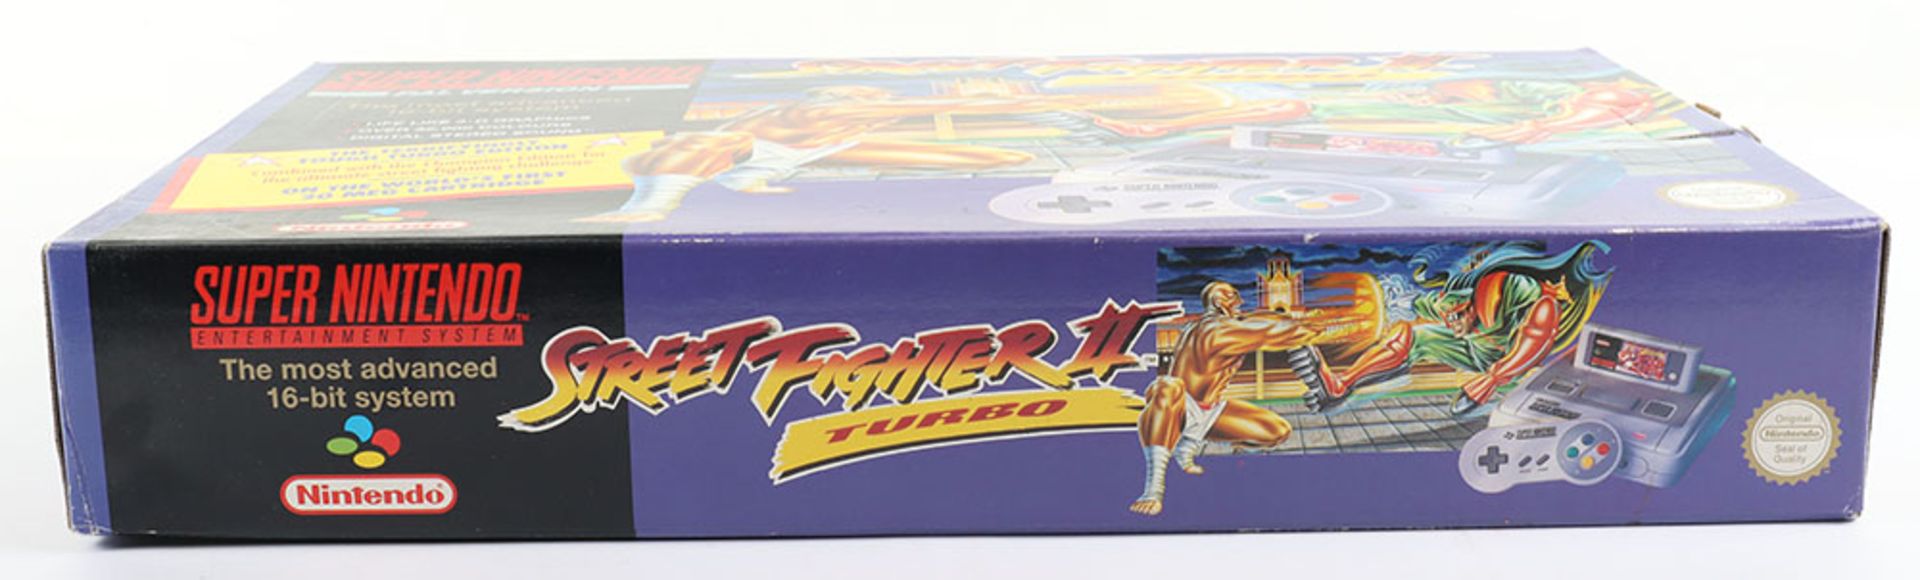 Super Nintendo Street Fighter 2 Turbo edition boxed - Image 6 of 11